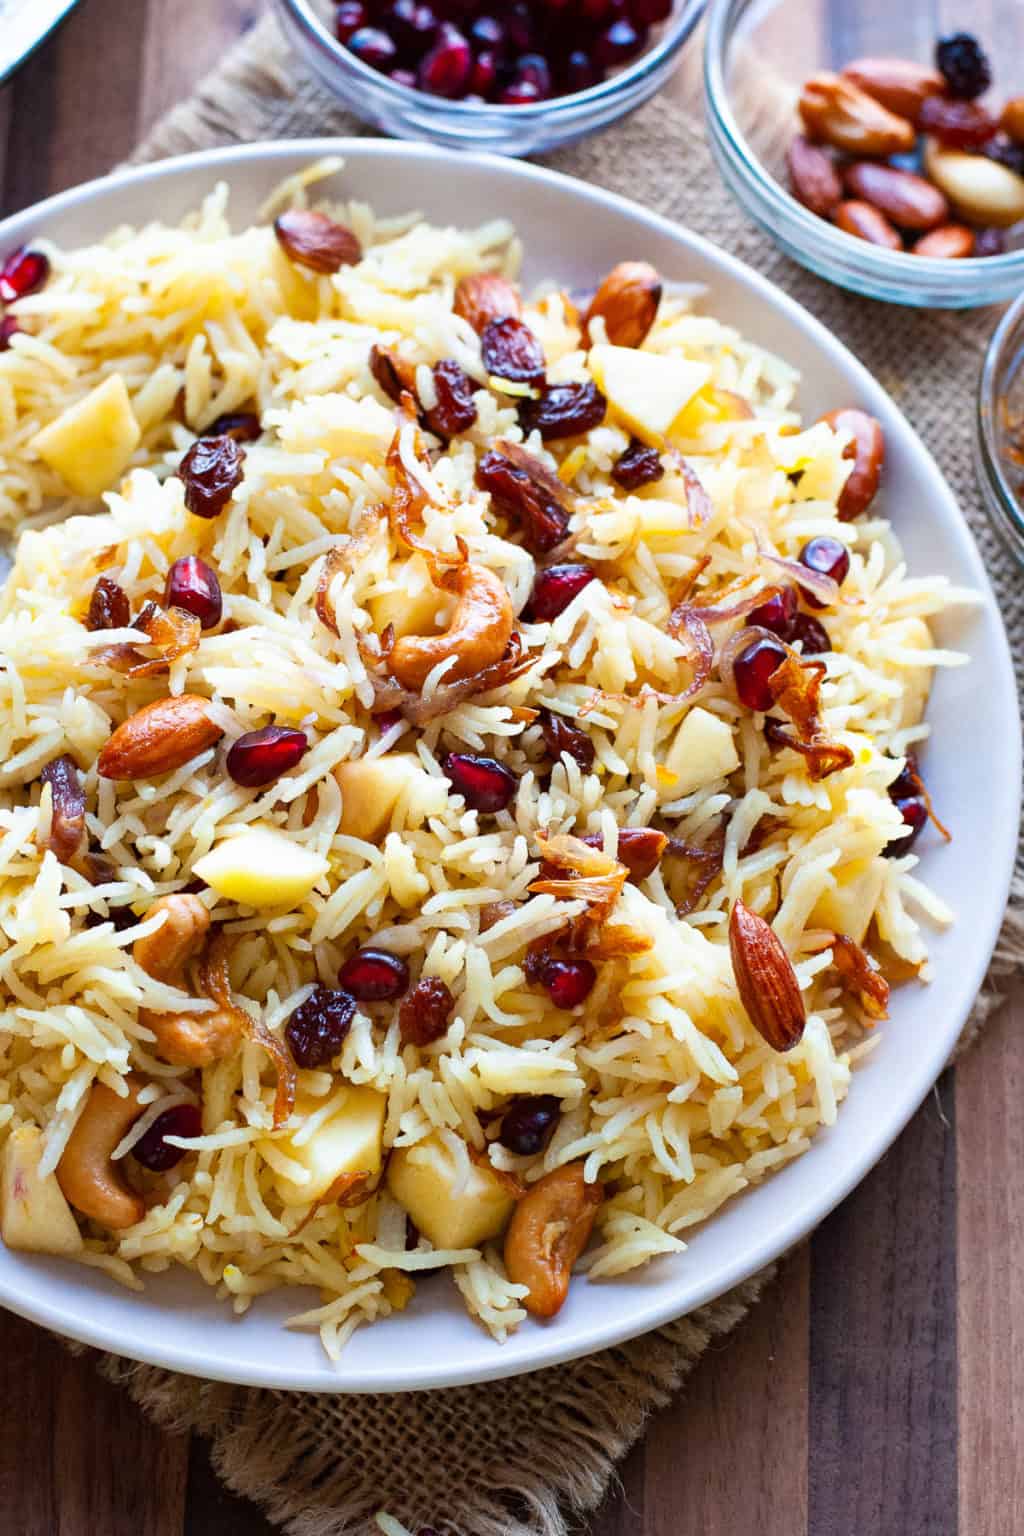 Kashmiri Pulao with Fruits and Nuts | Indian Ambrosia